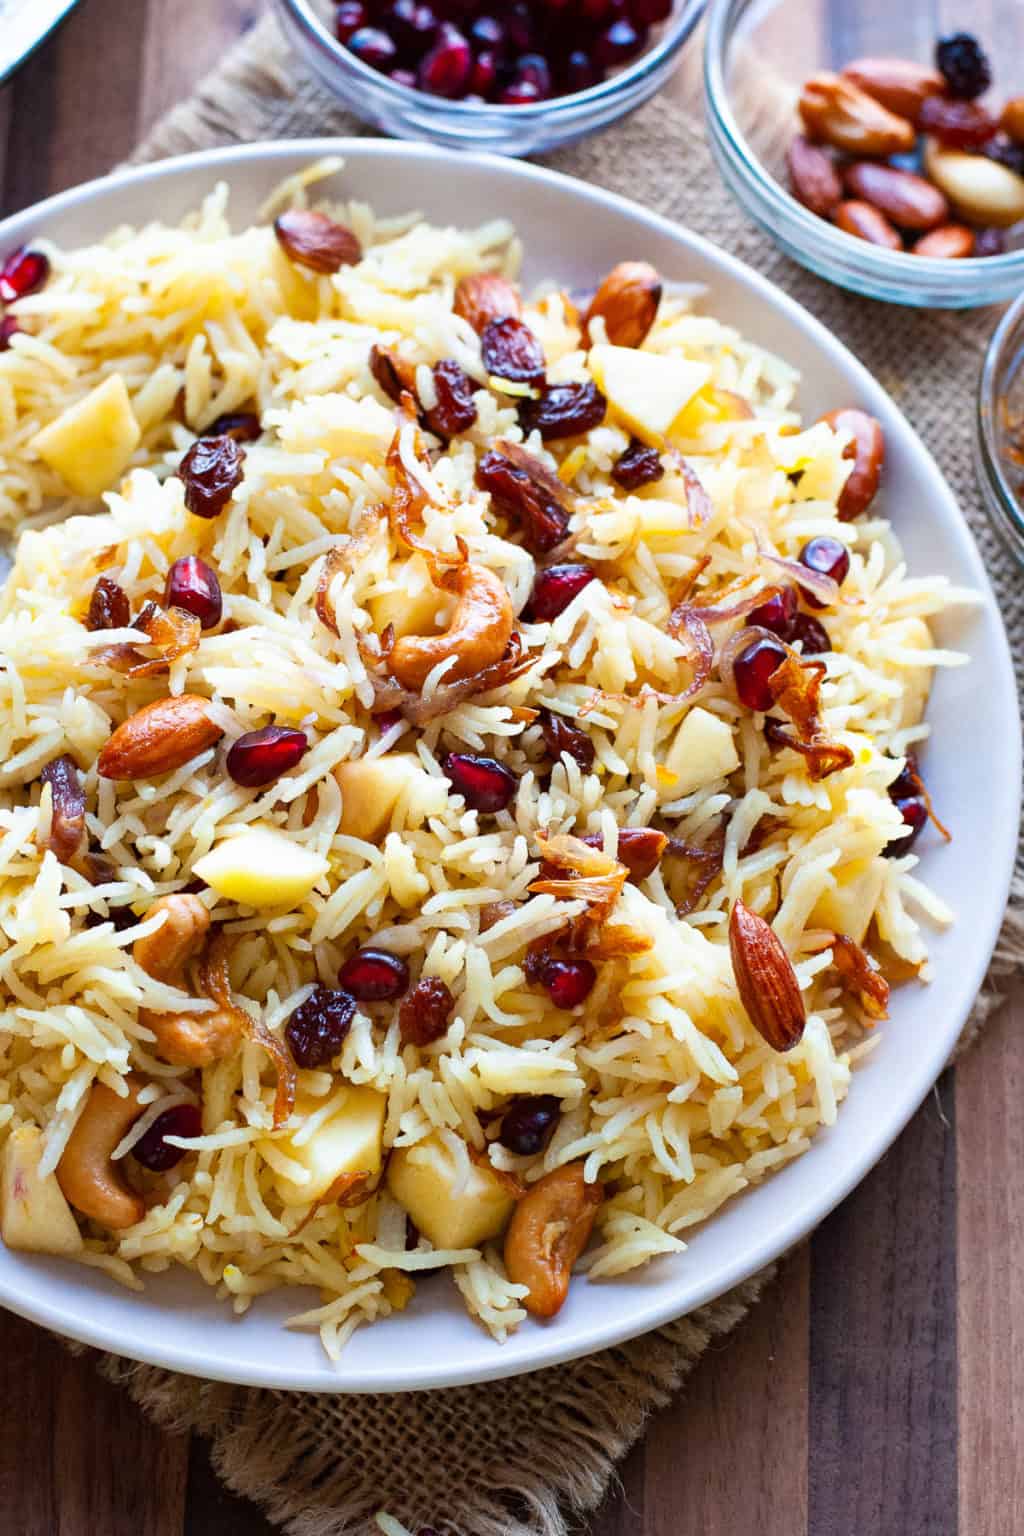 Kashmiri Pulao with Fruits and Nuts | Indian Ambrosia